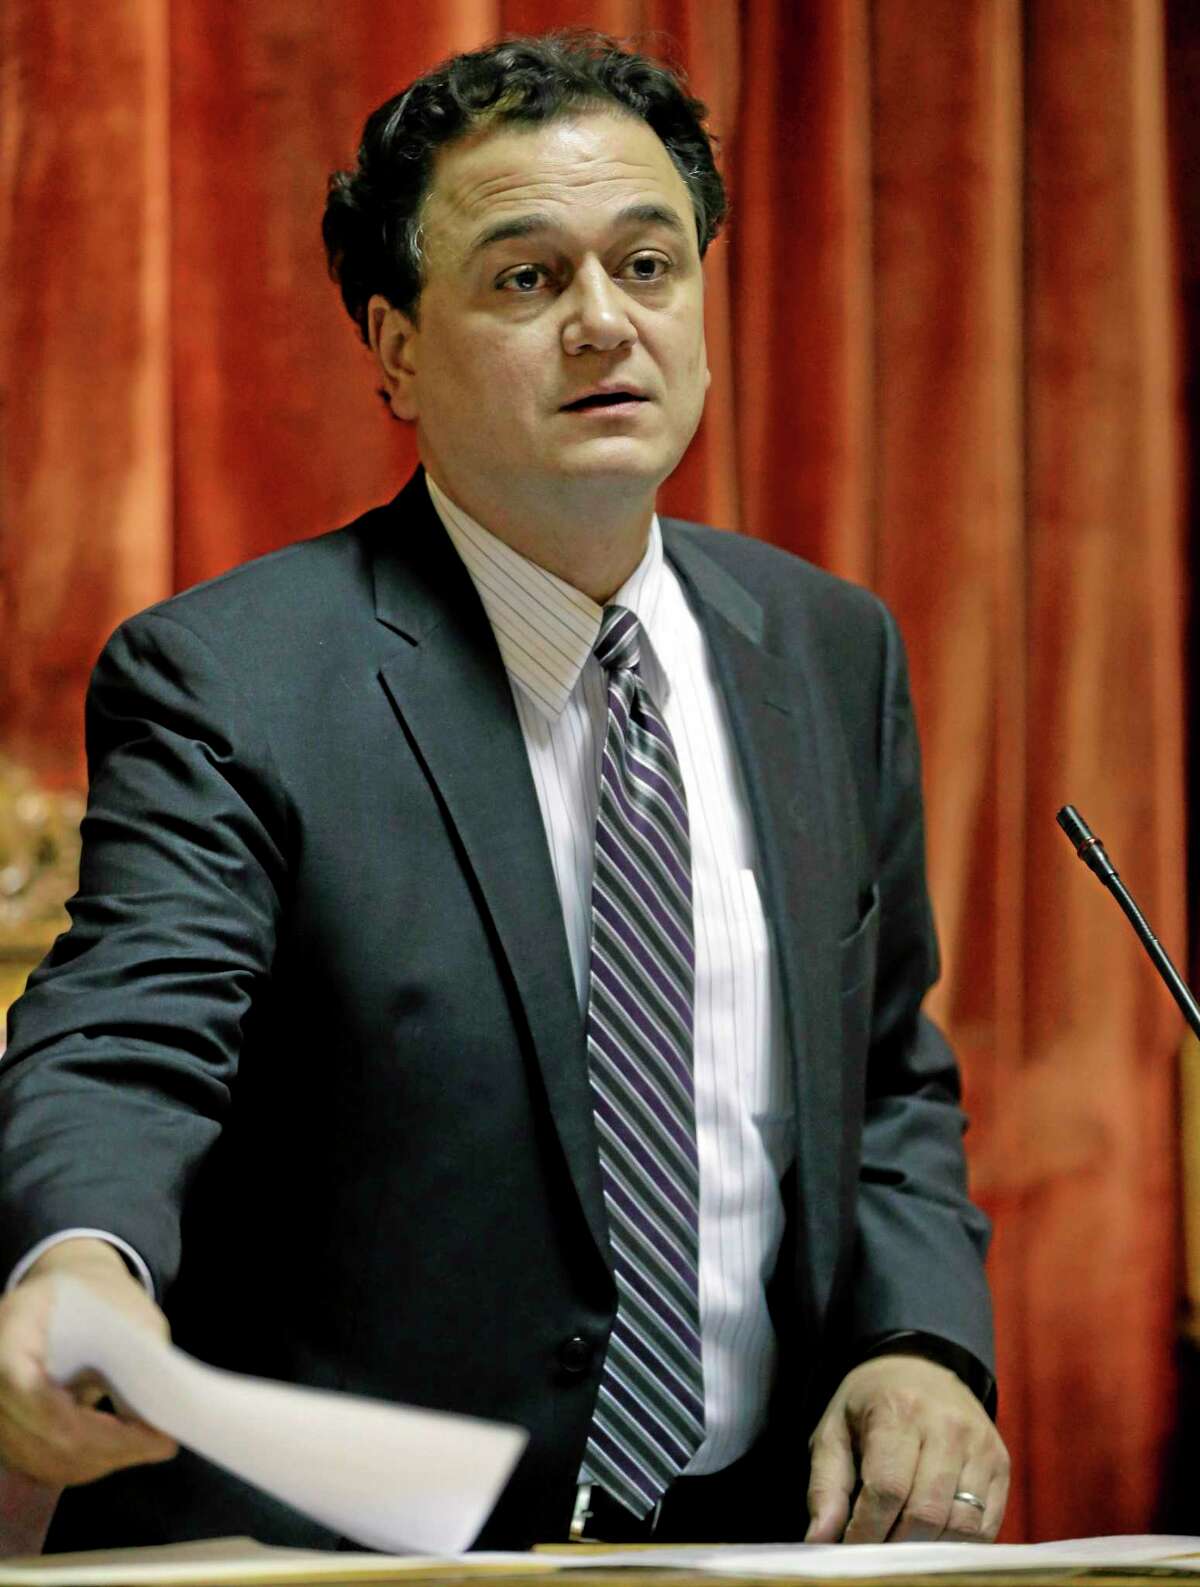 In this Jan. 24, 2013, photo, Rhode Island Speaker of the House Gordon Fox places papers on the rostrum moments before calling the House into session in Providence, R.I.